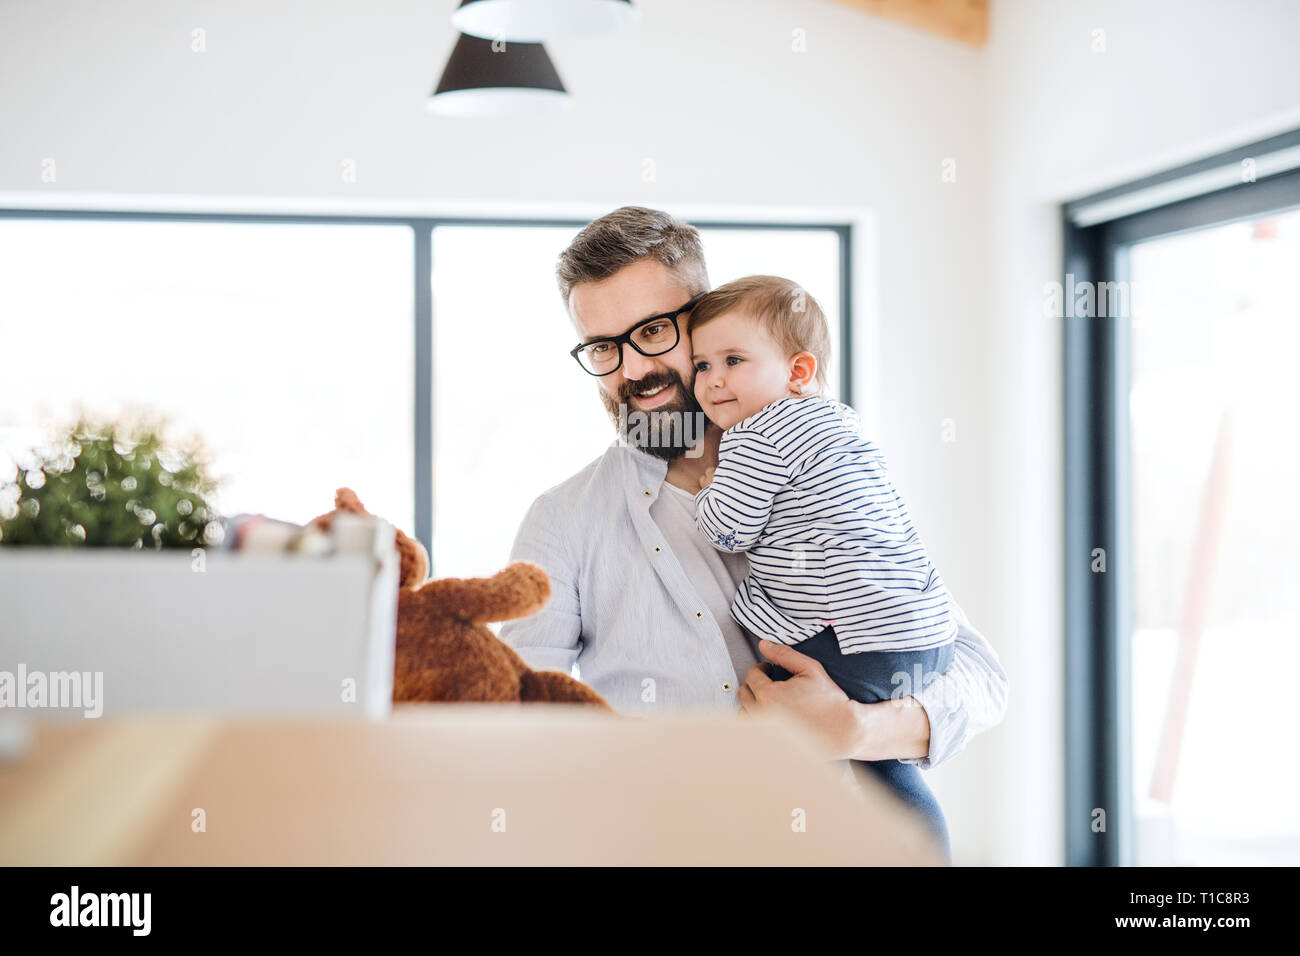 A portrait of young father with a toddler girl moving in new home. Stock Photo